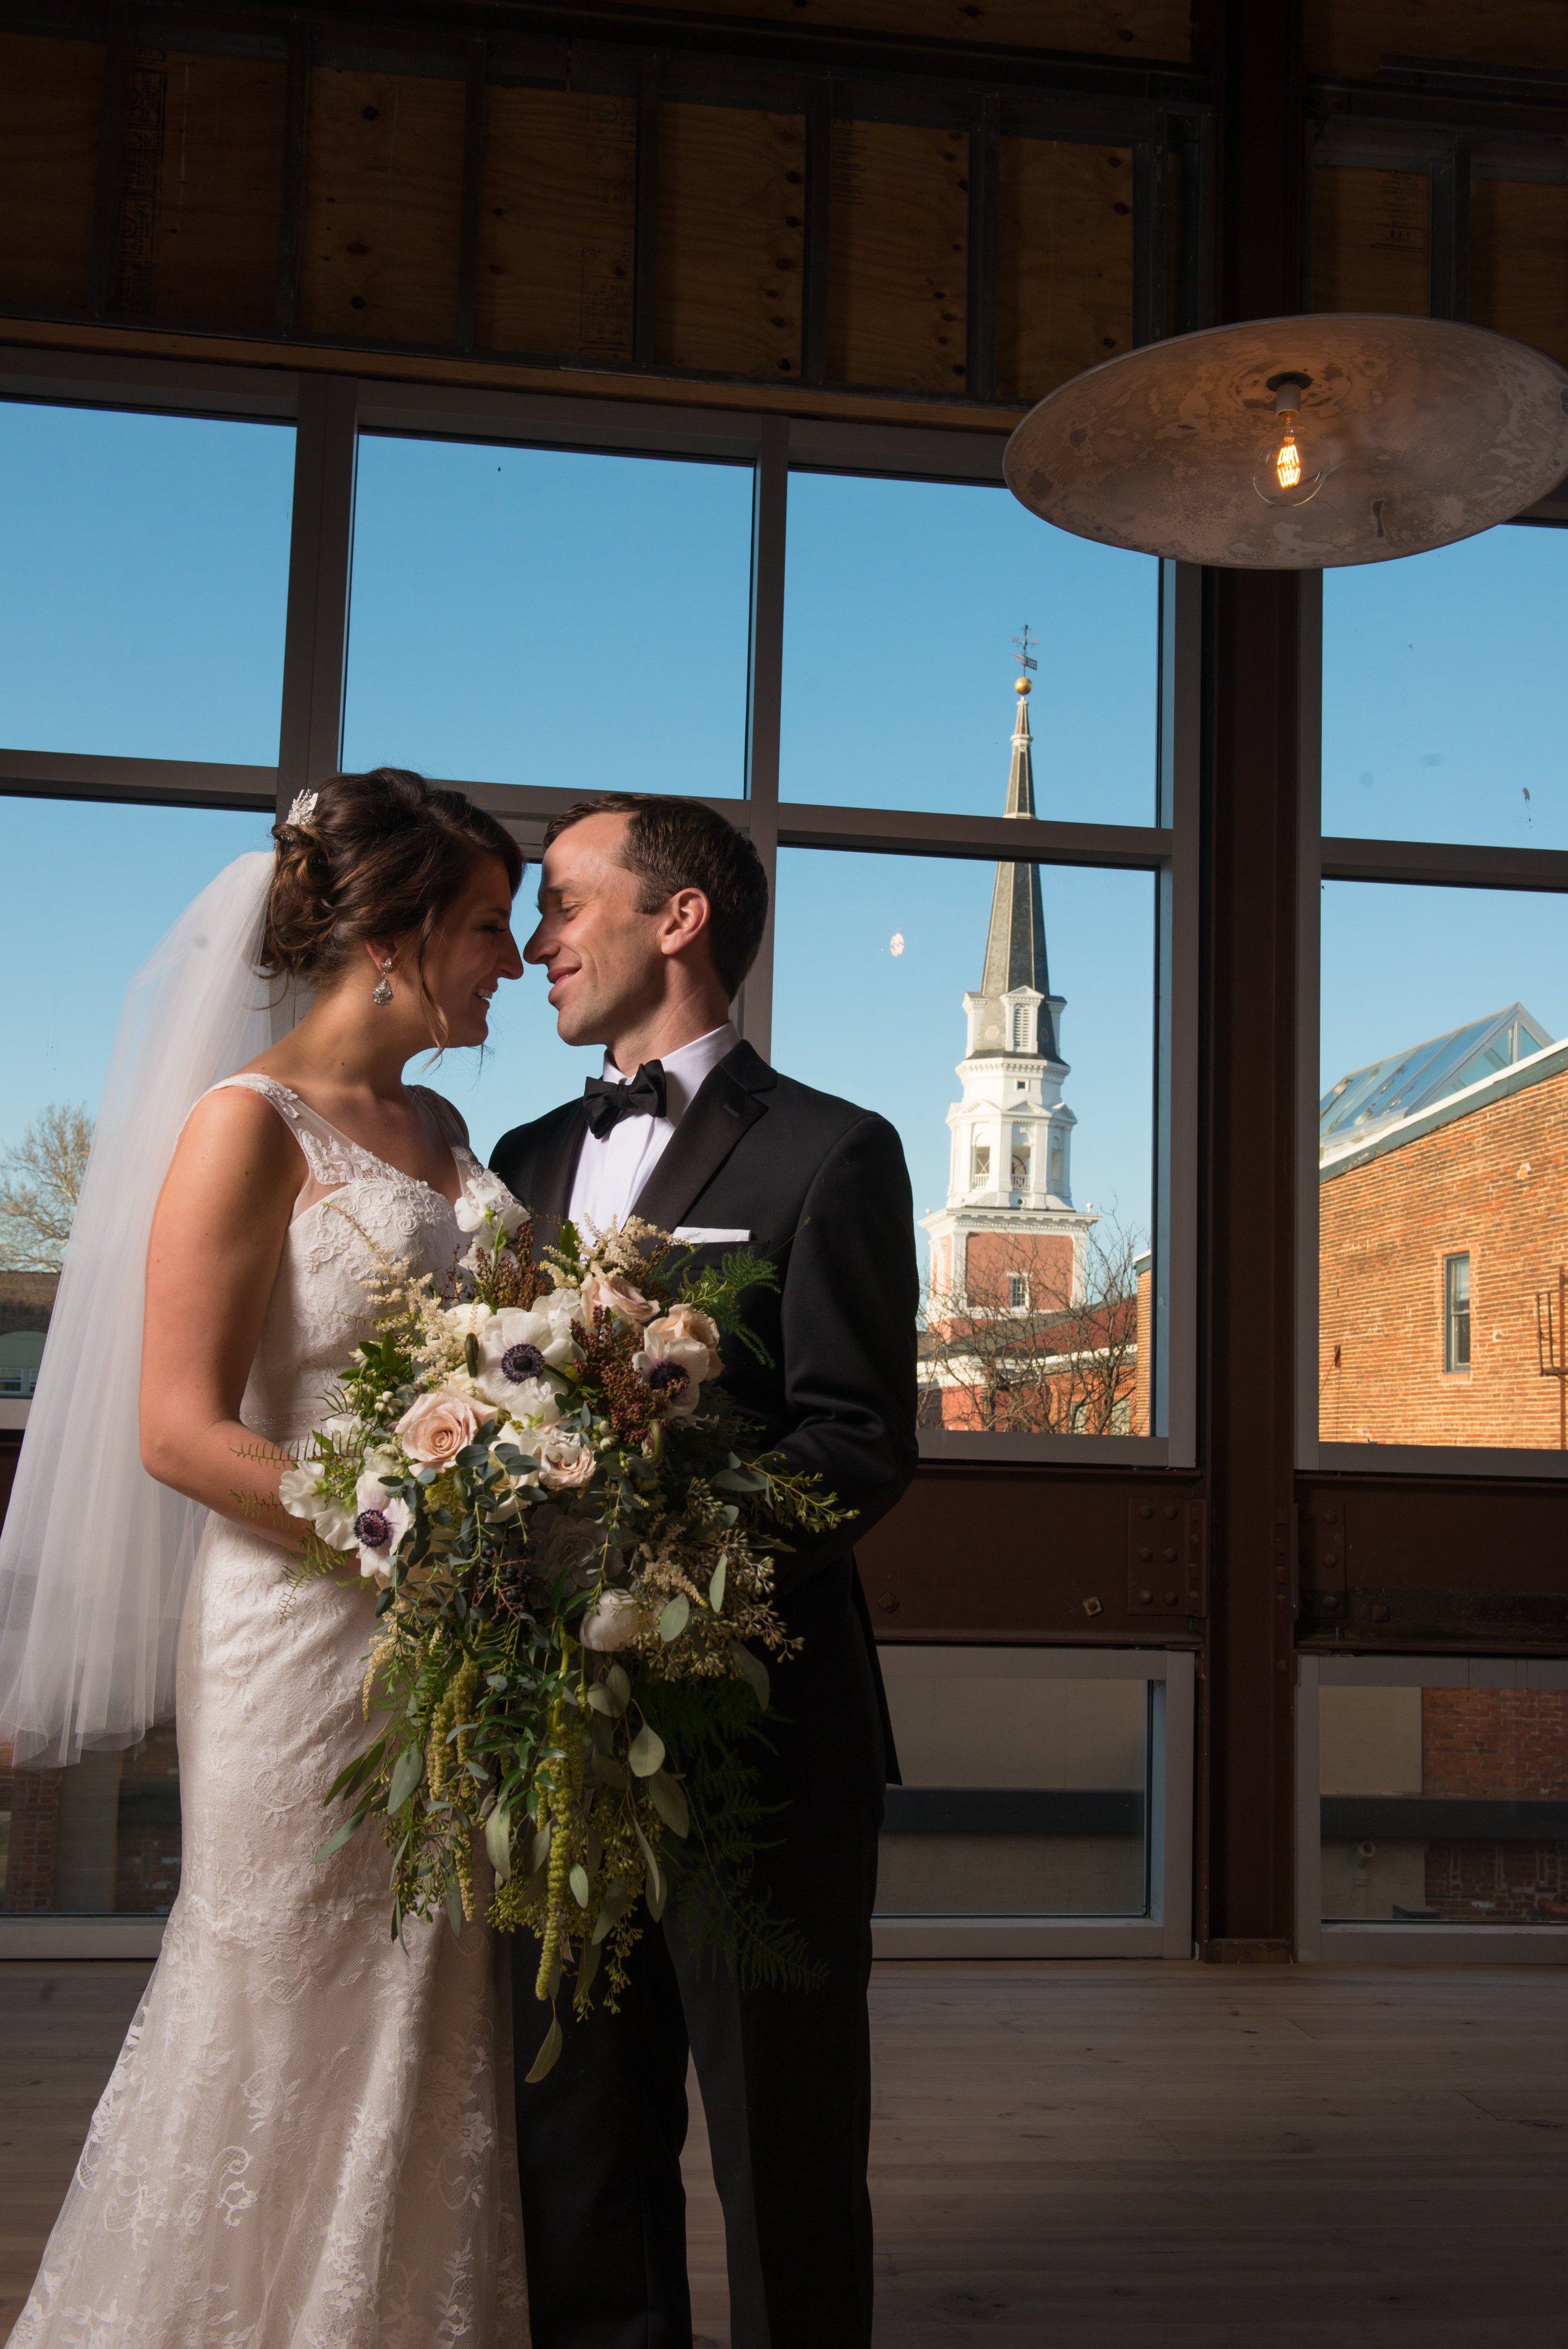 Bride and groom in front of large window with church in background